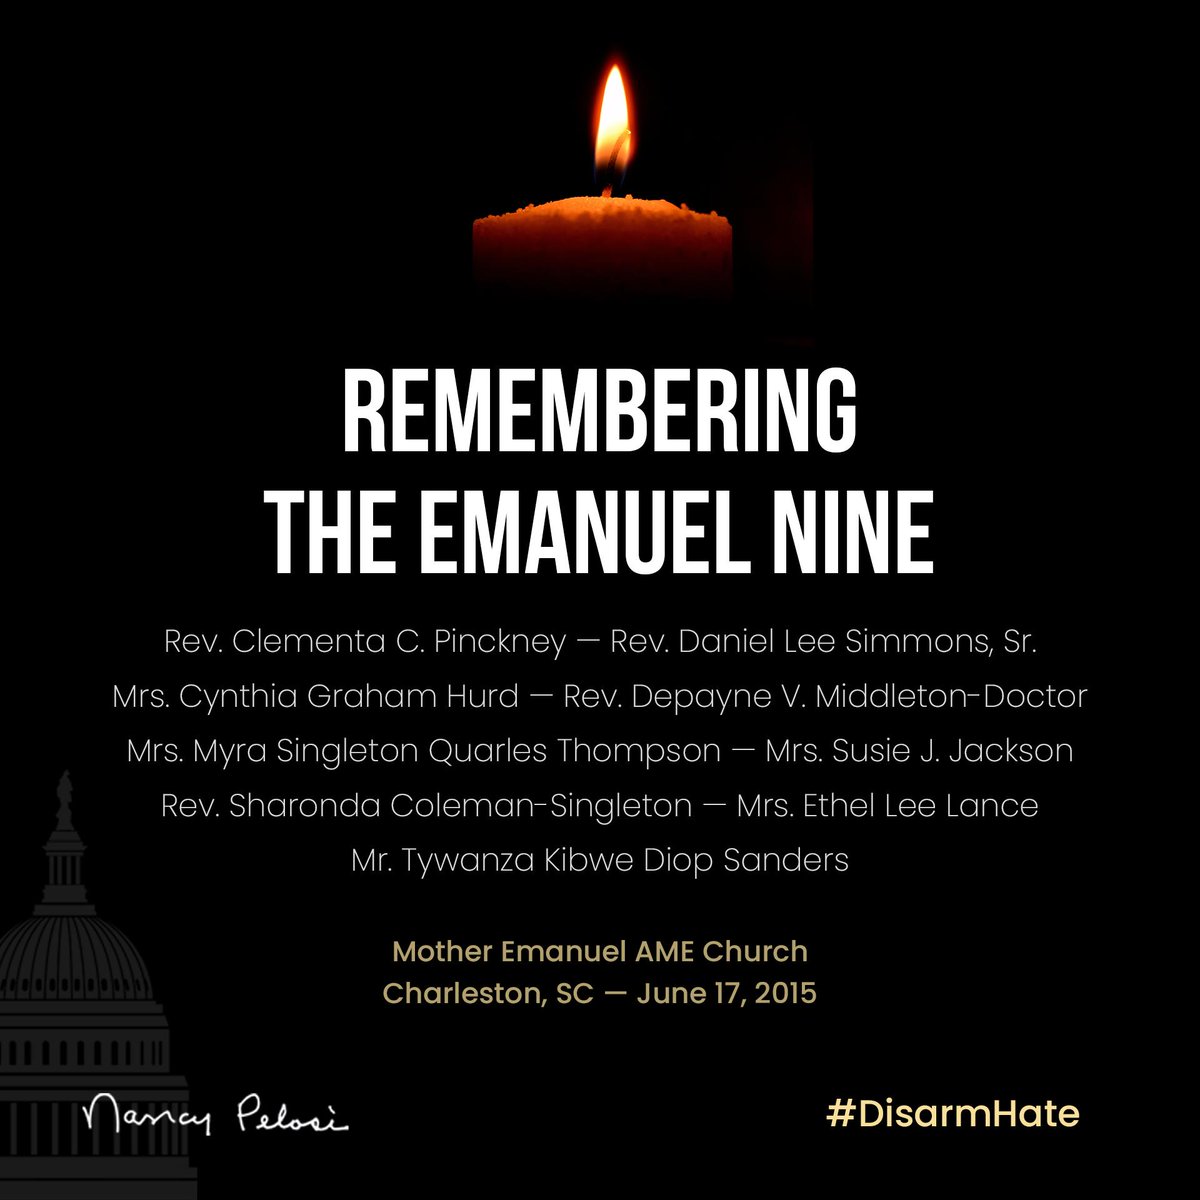 Today, we remember the Emanuel Nine, worshippers murdered by a white supremacist at Mother Emanuel AME Church in Charleston, South Carolina. 

We renew our pledge to honor them with action and #DisarmHate.

We will overcome the gun industry and close the gun show loophole. -NP